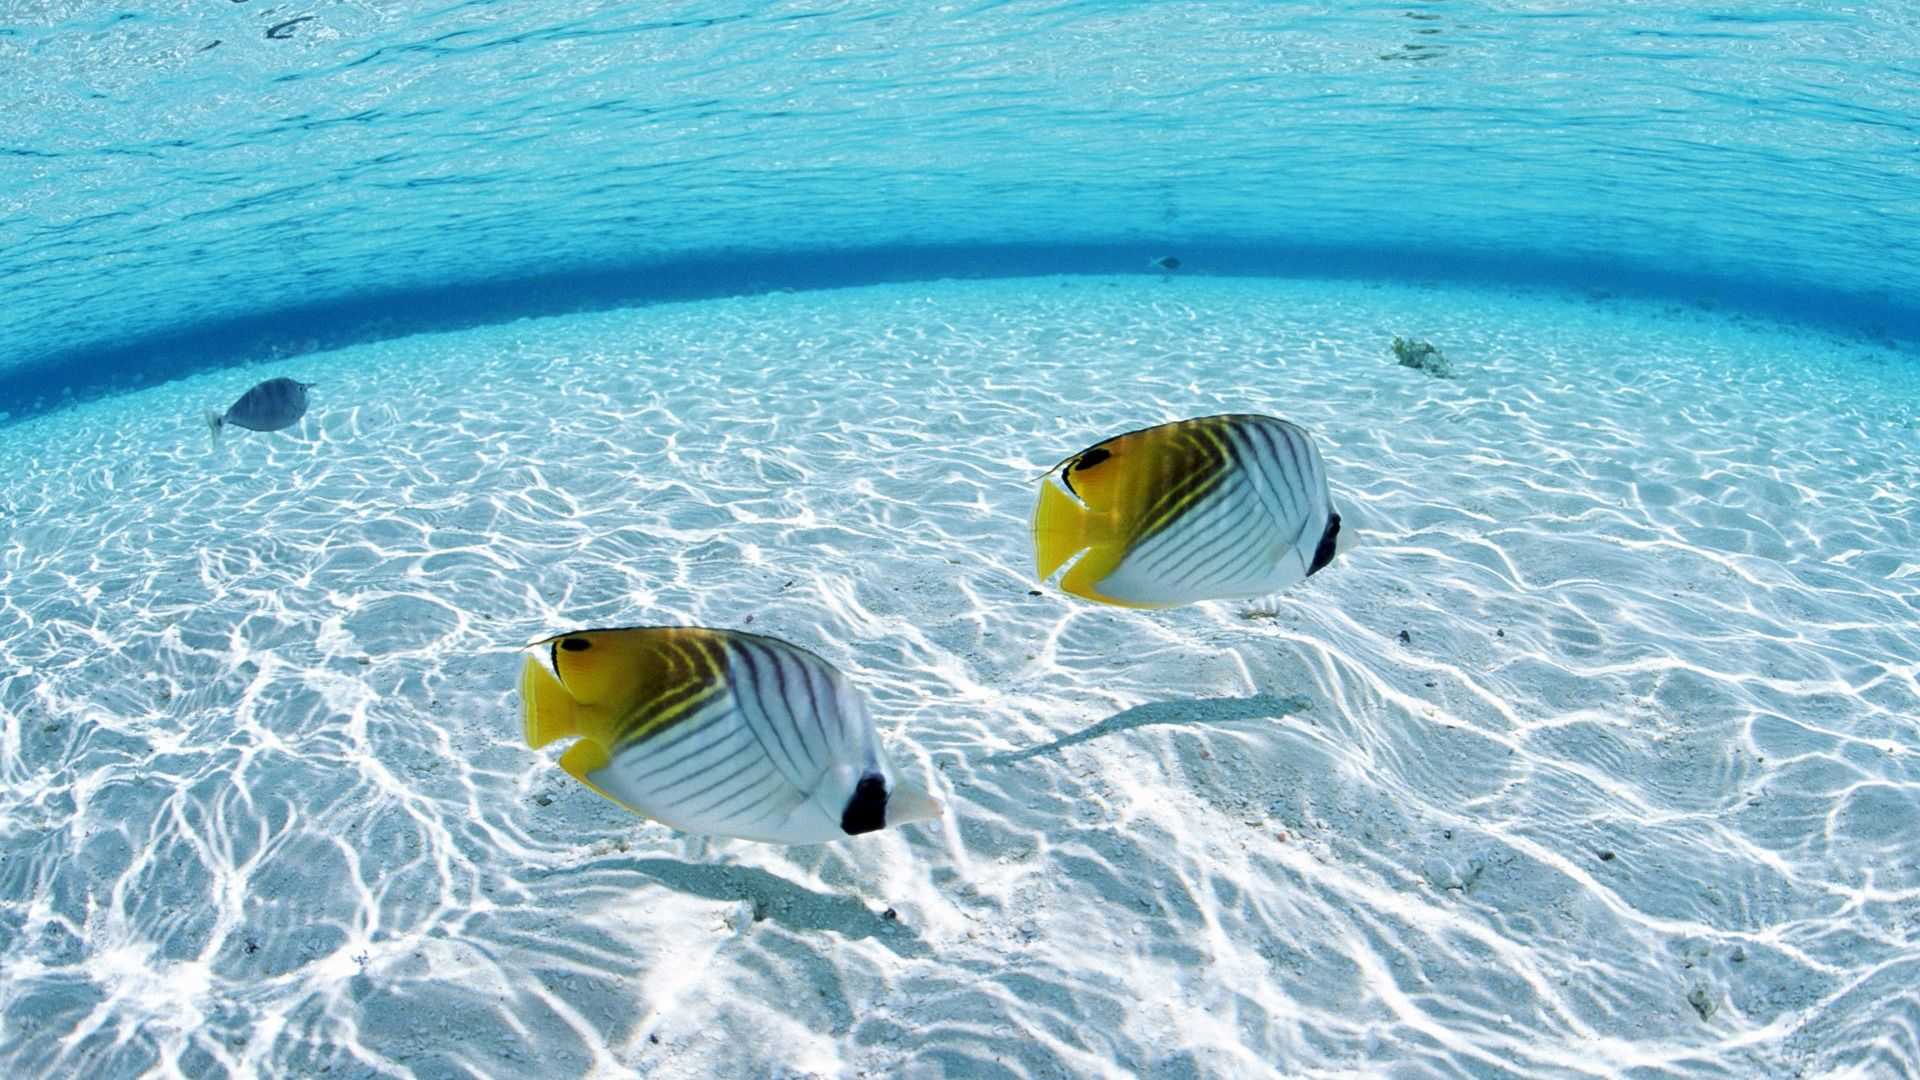 A pair of butterflyfish swim in the shallow waters of the Maldives. - Underwater